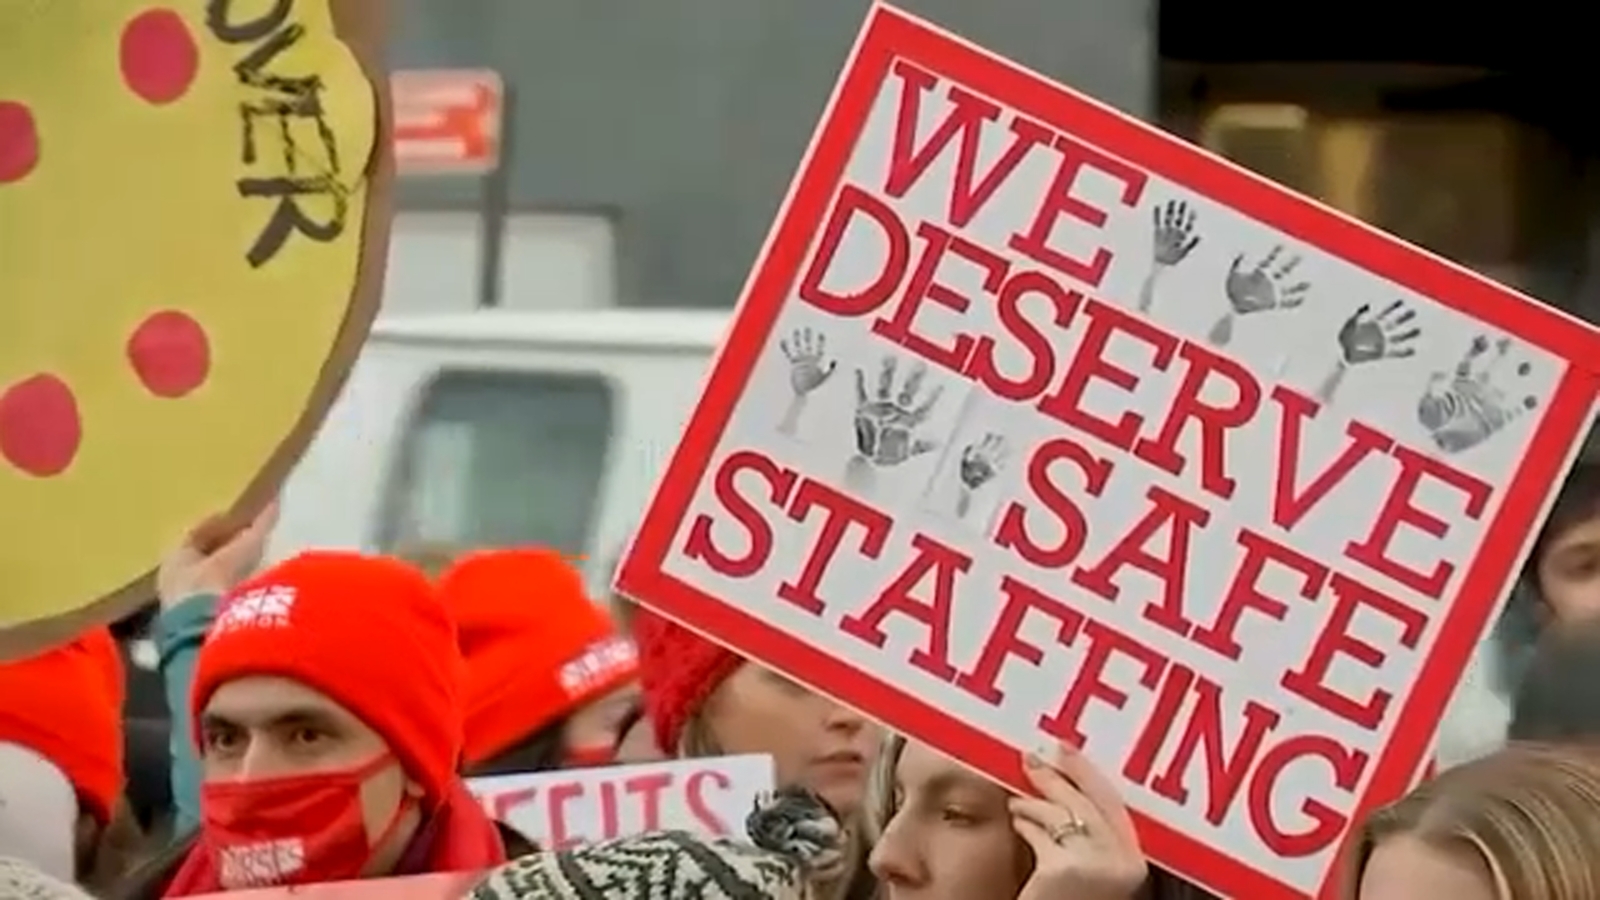 NYC nurses strike enters Day 2 with talks set to resume at 1 hospital